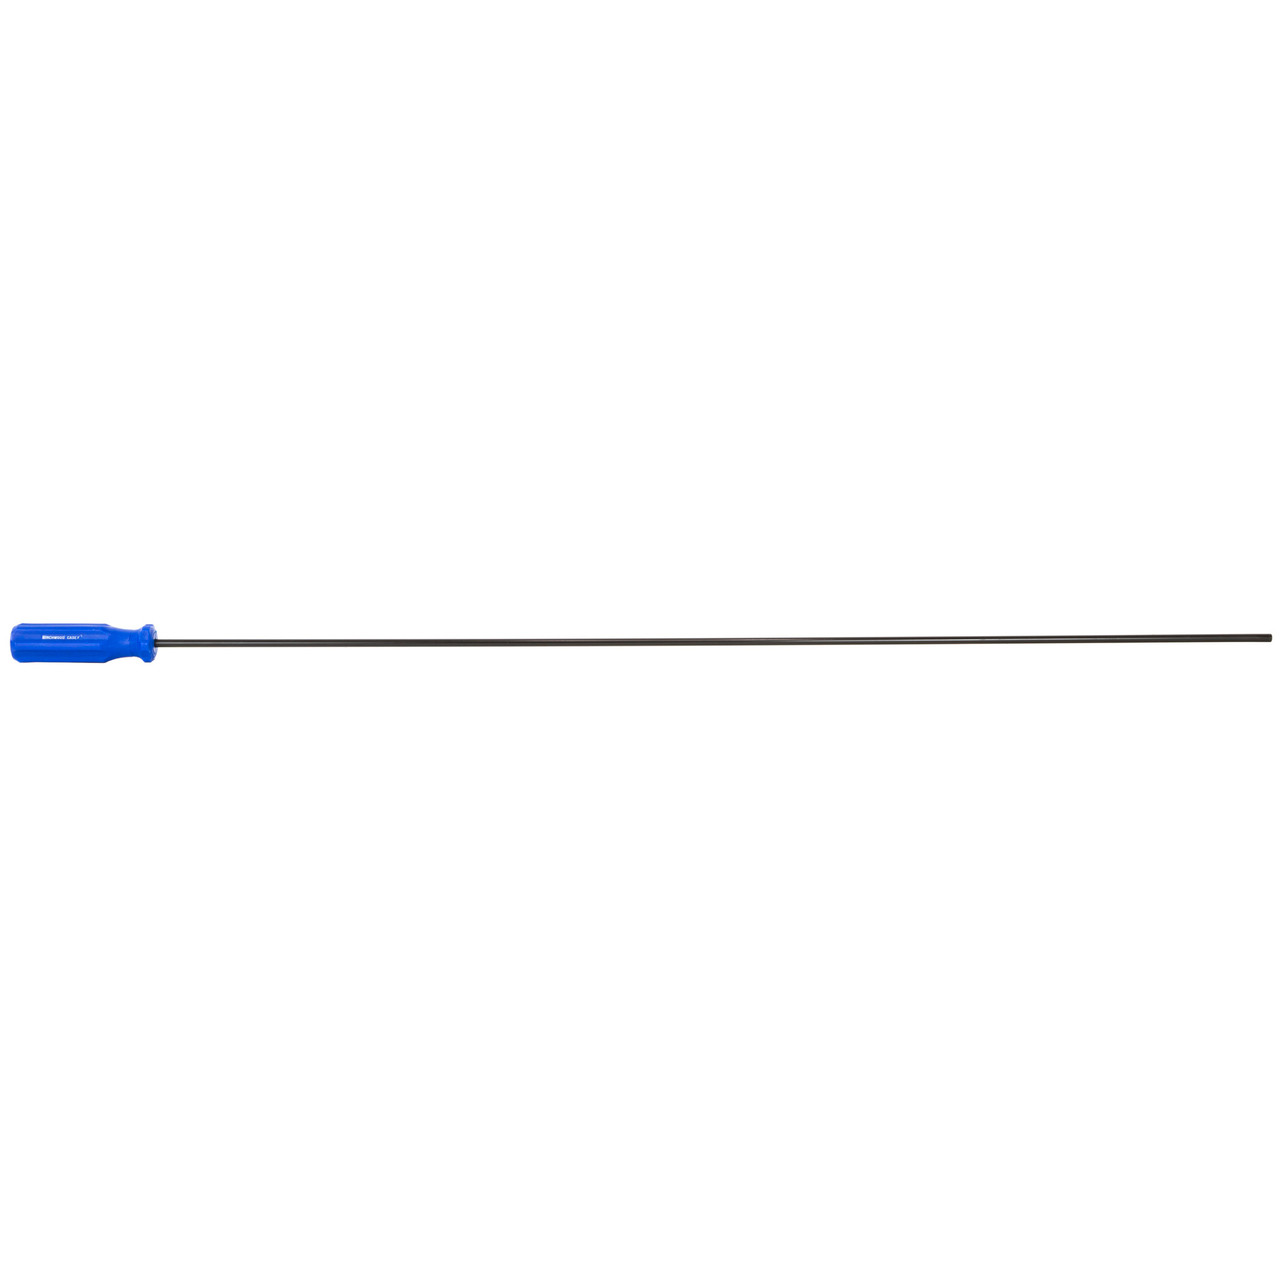 Birchwood Casey BC-41407 Coated Cleaning Rod 33" 270cal